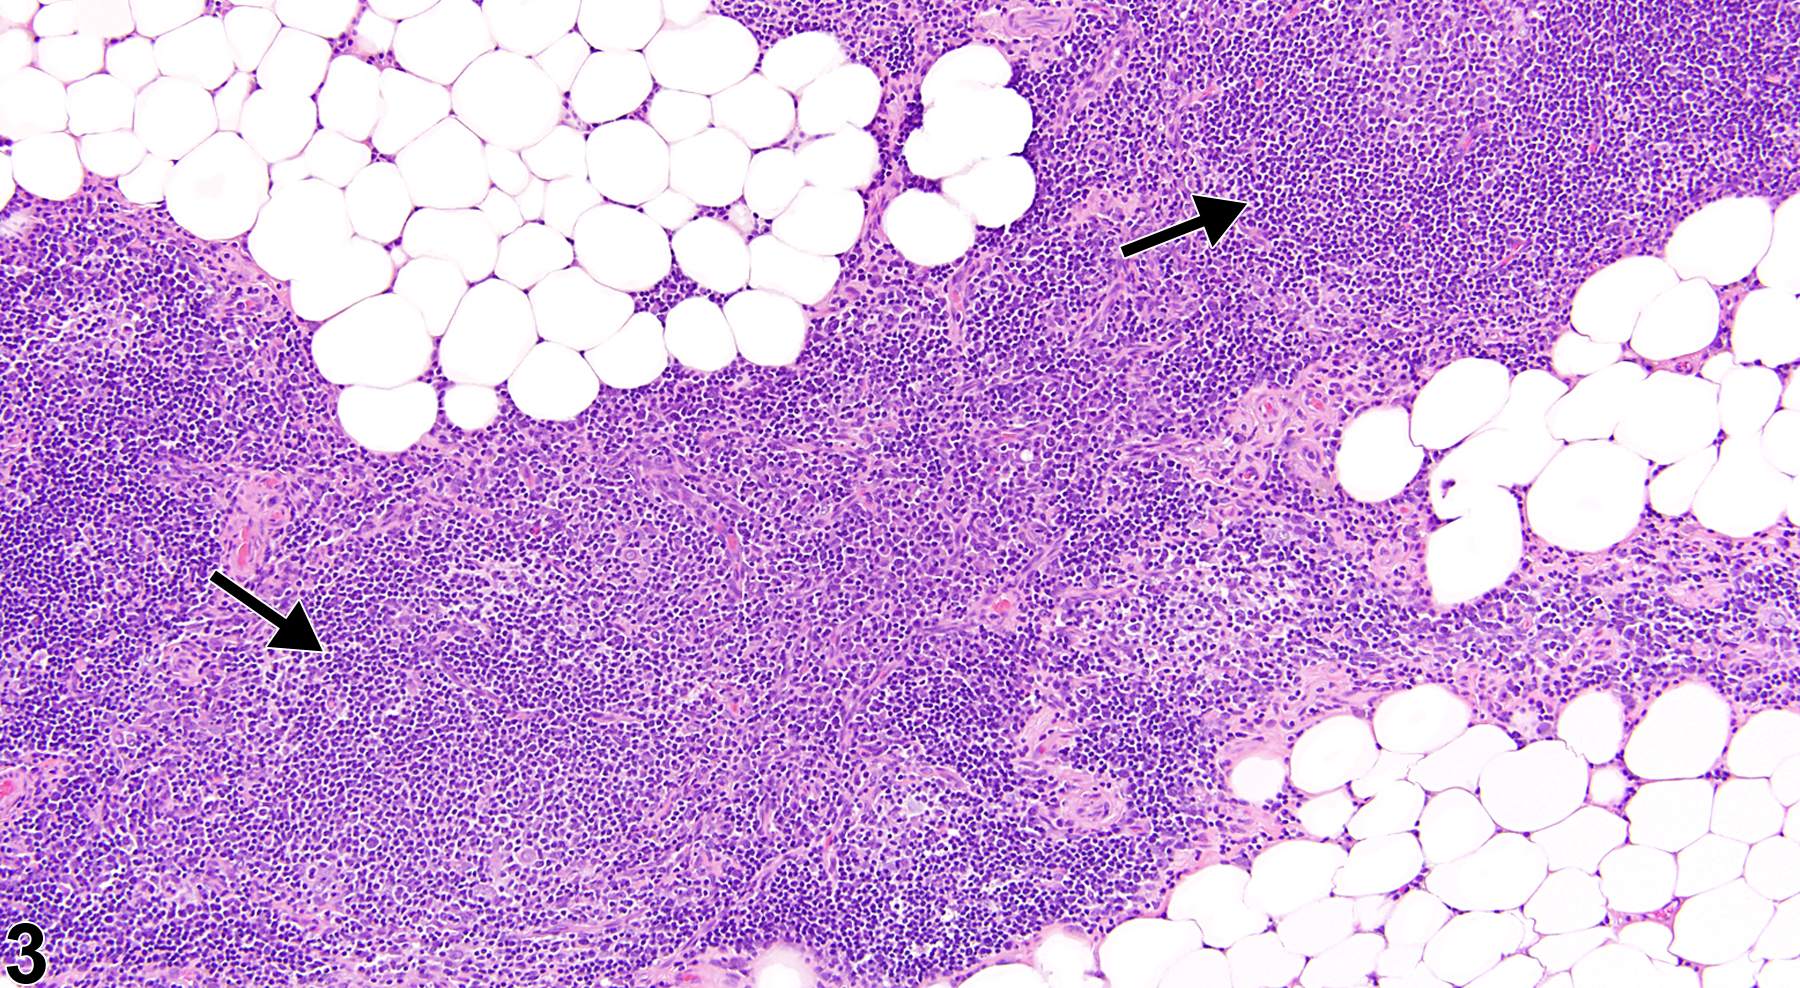 Image of involution in the thymus from a male Wistar Han rat in a chronic study